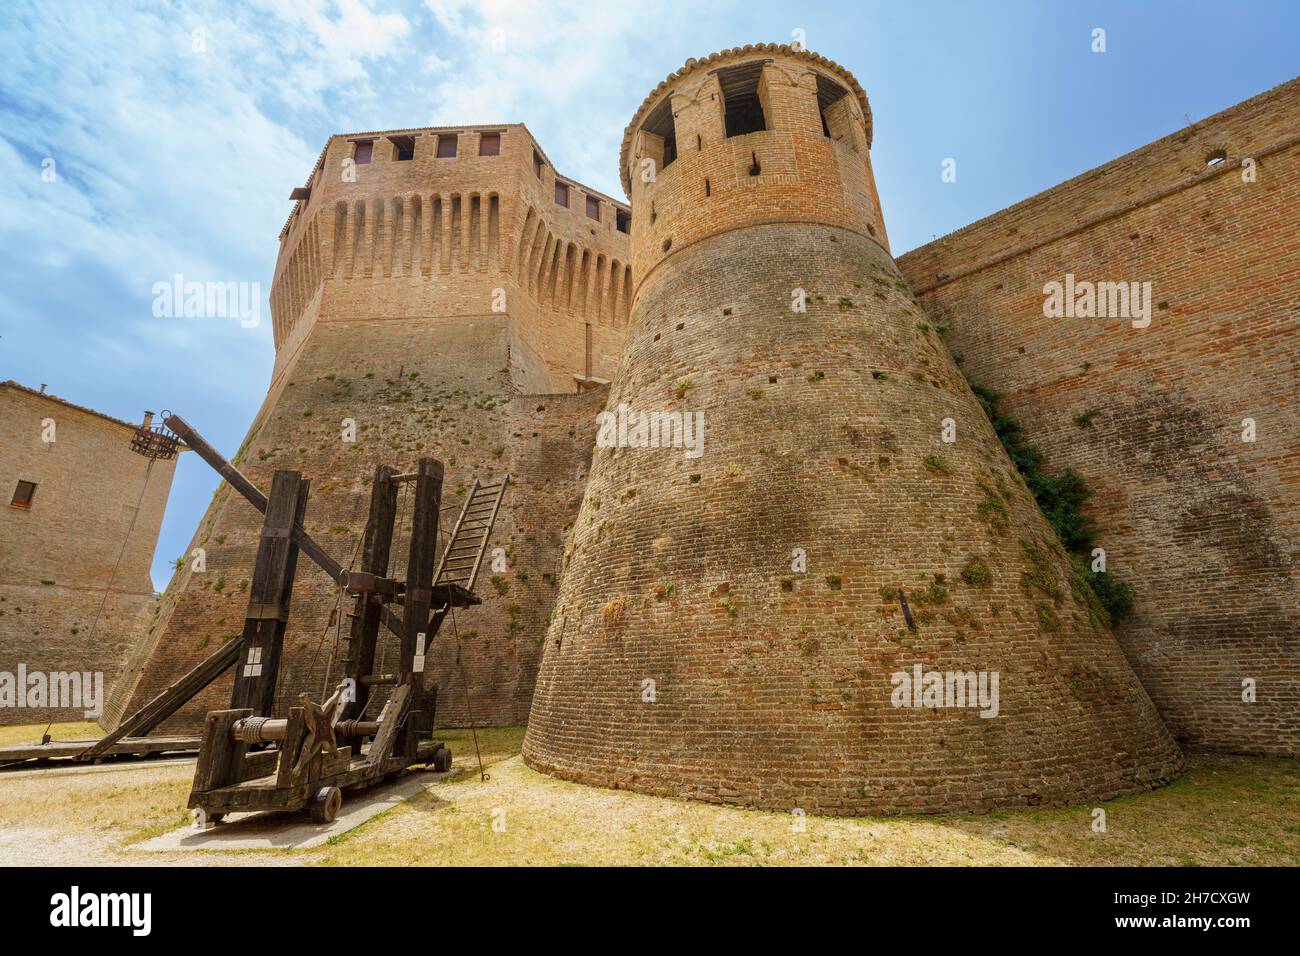 Mondavio, Pesaro e Urbino province, Marche, Italy: medieval city surrounded by walls. Medieval weapons Stock Photo